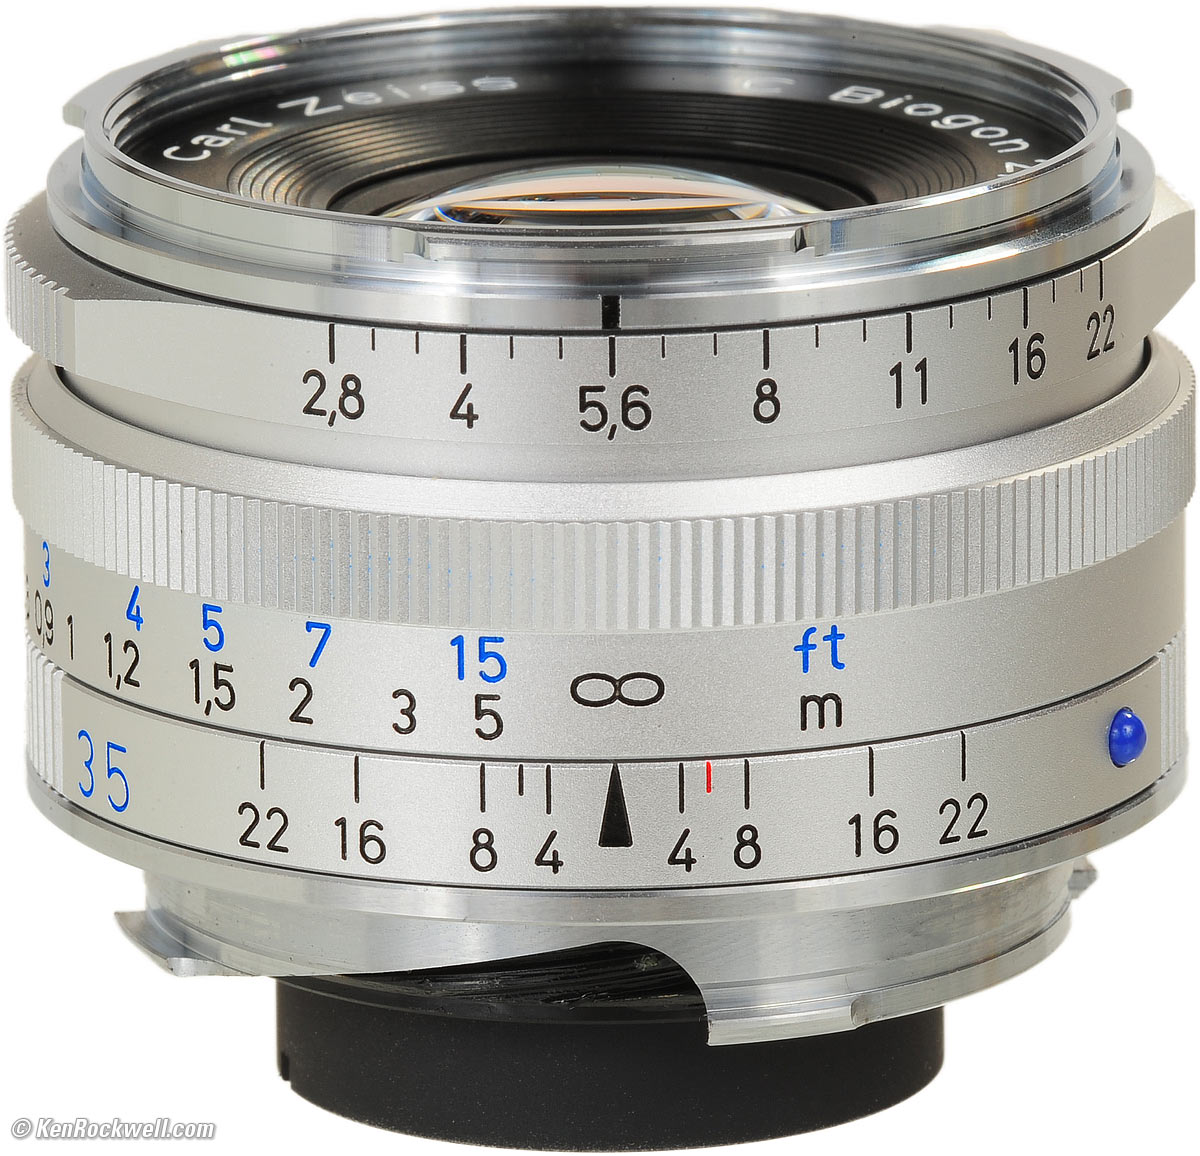 Zeiss 35mm f/2.8 ZM Review